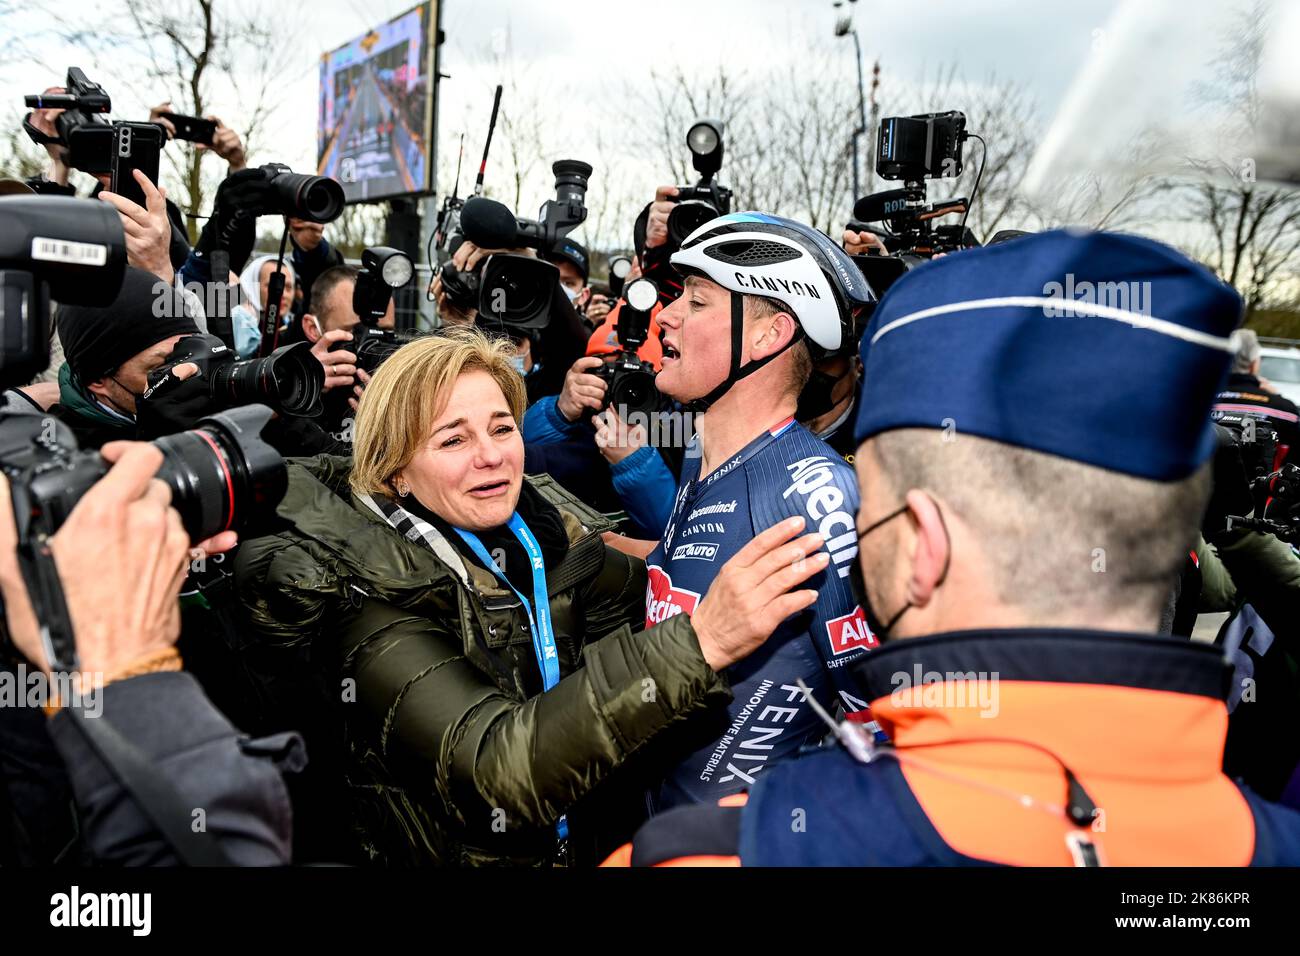 The 2022 Tour of Flanders from Antwerp (Antwerpen) to Oudenaarde. Mathieu Van Der Poel for team AlpecinFenix (NED) embraces his mother on the finish line after winning the stage. Stock Photo